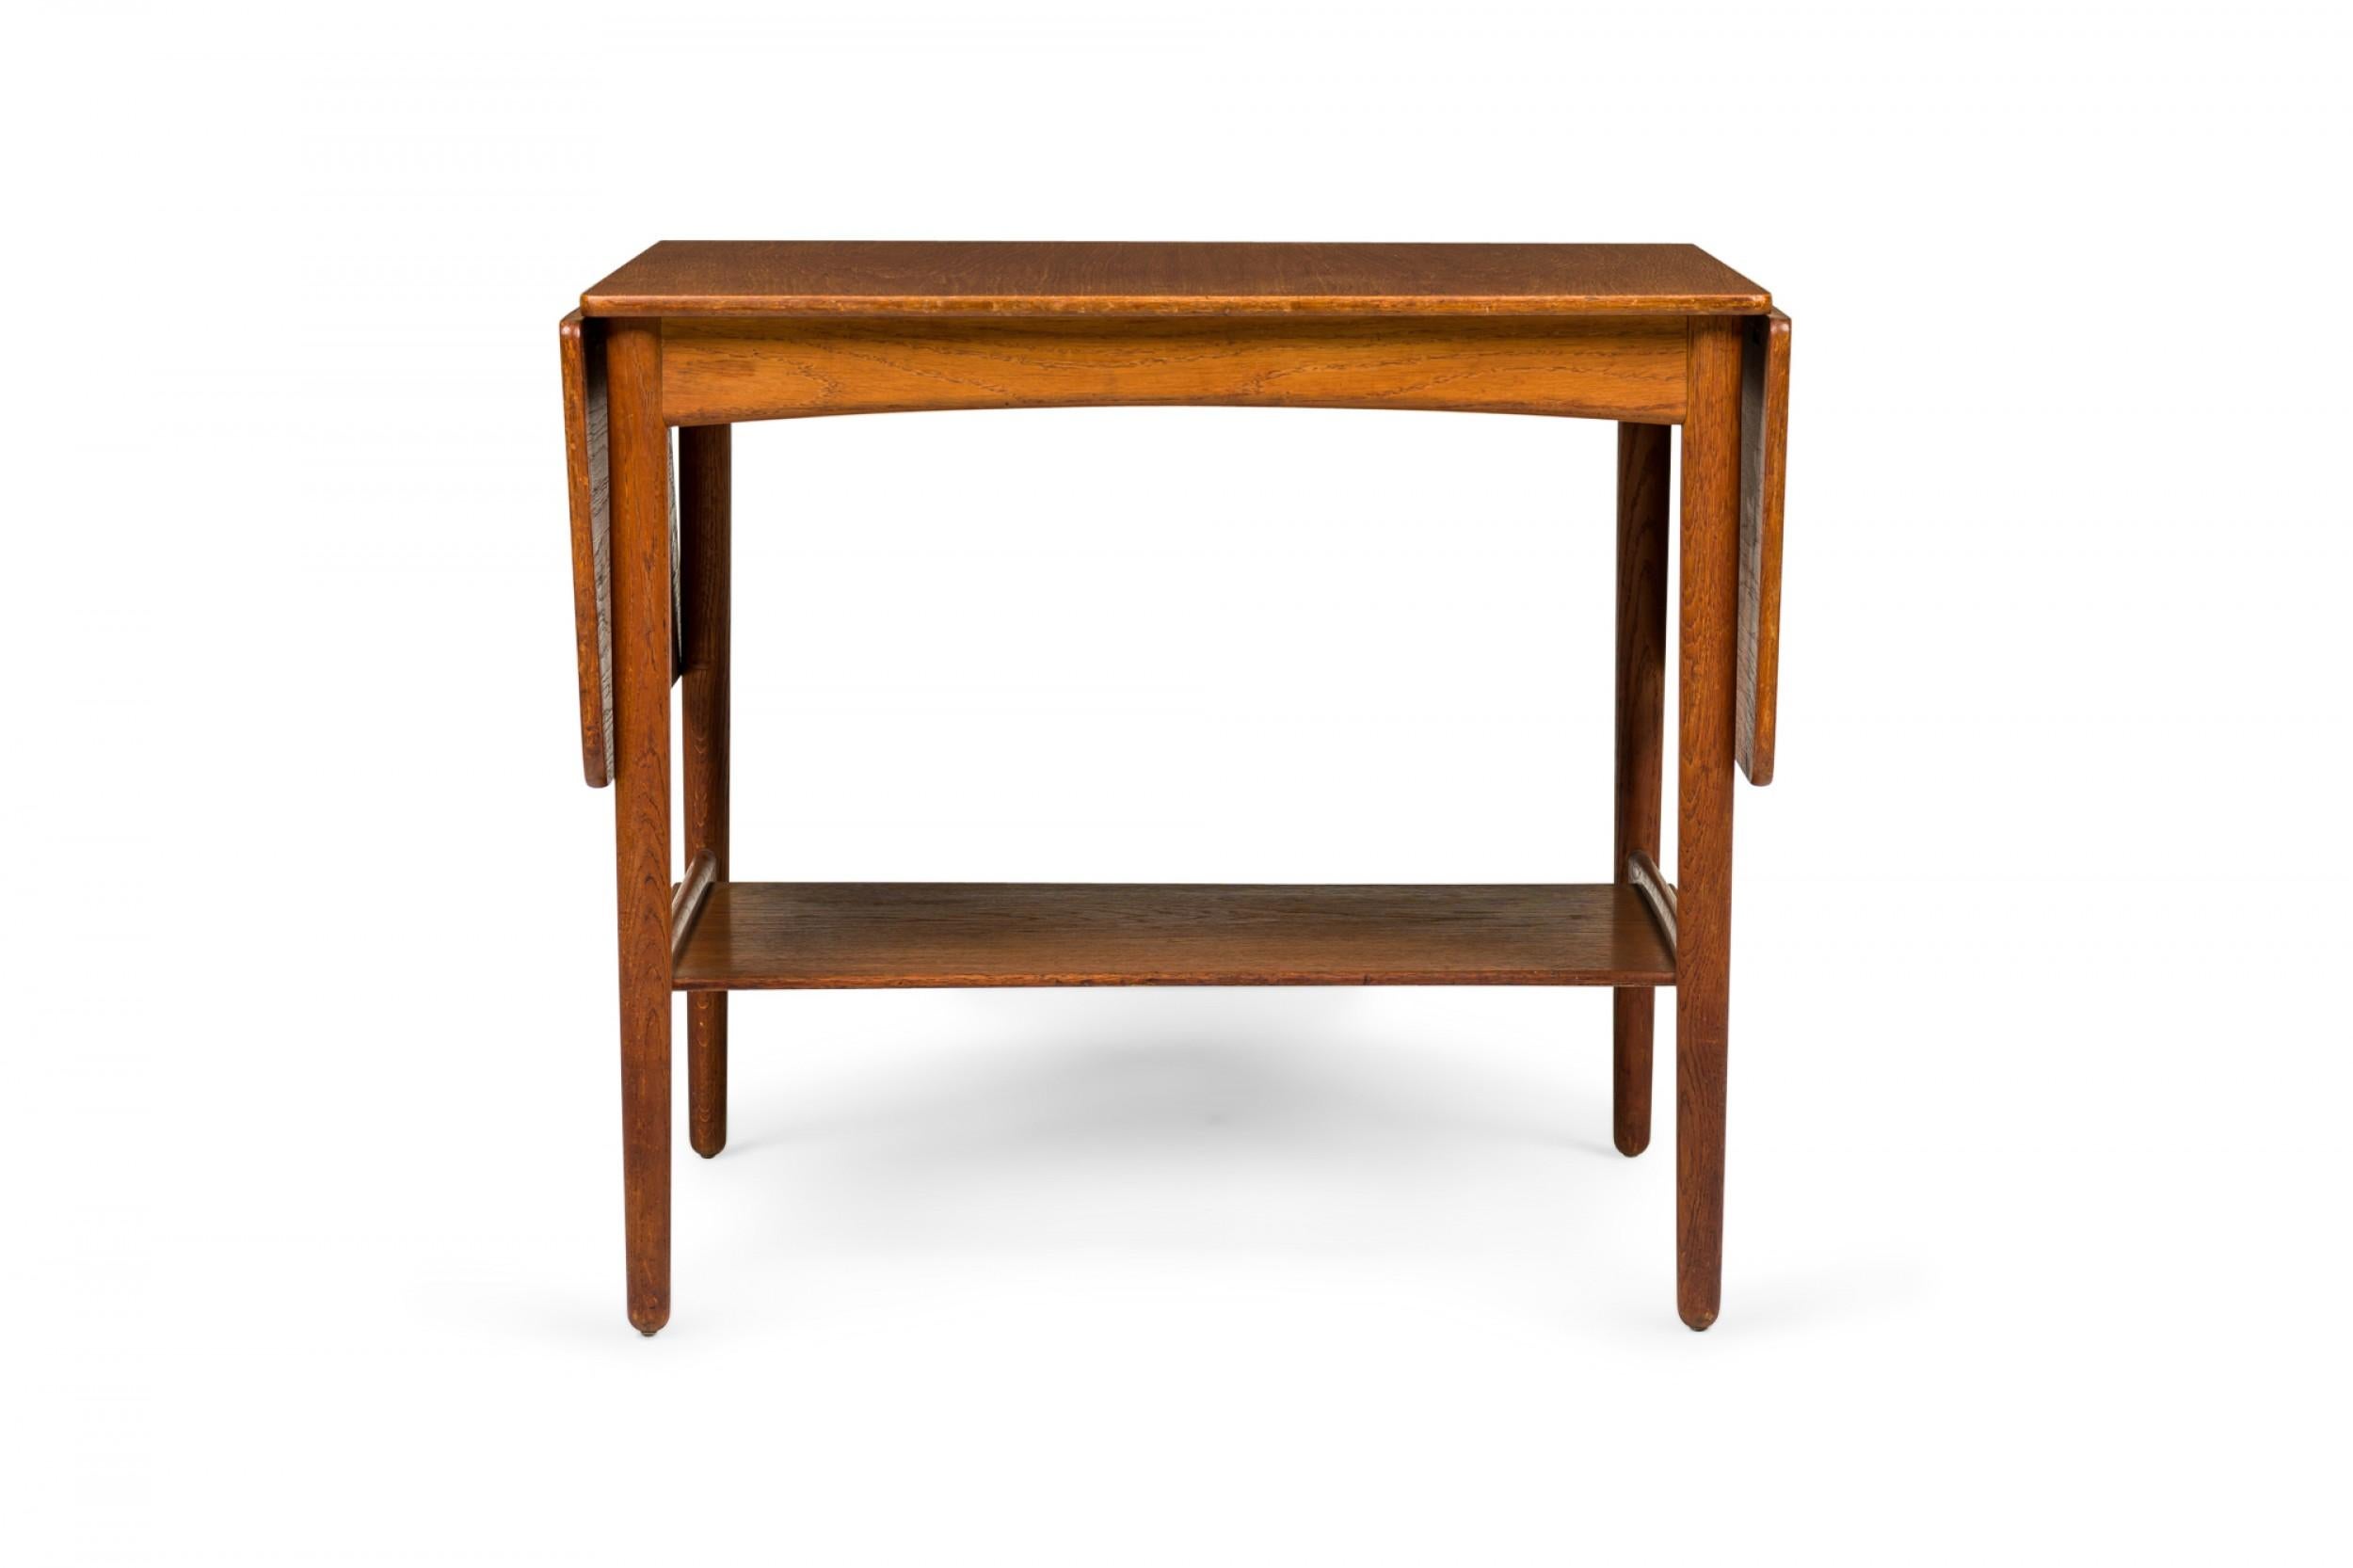 Danish mid-century wooden end / side table with a rectangular top and two drop leaves above a lower narrow stretcher shelf connecting four tapered dowel legs. (HANS WEGNER FOR ANDREAS TUCK)